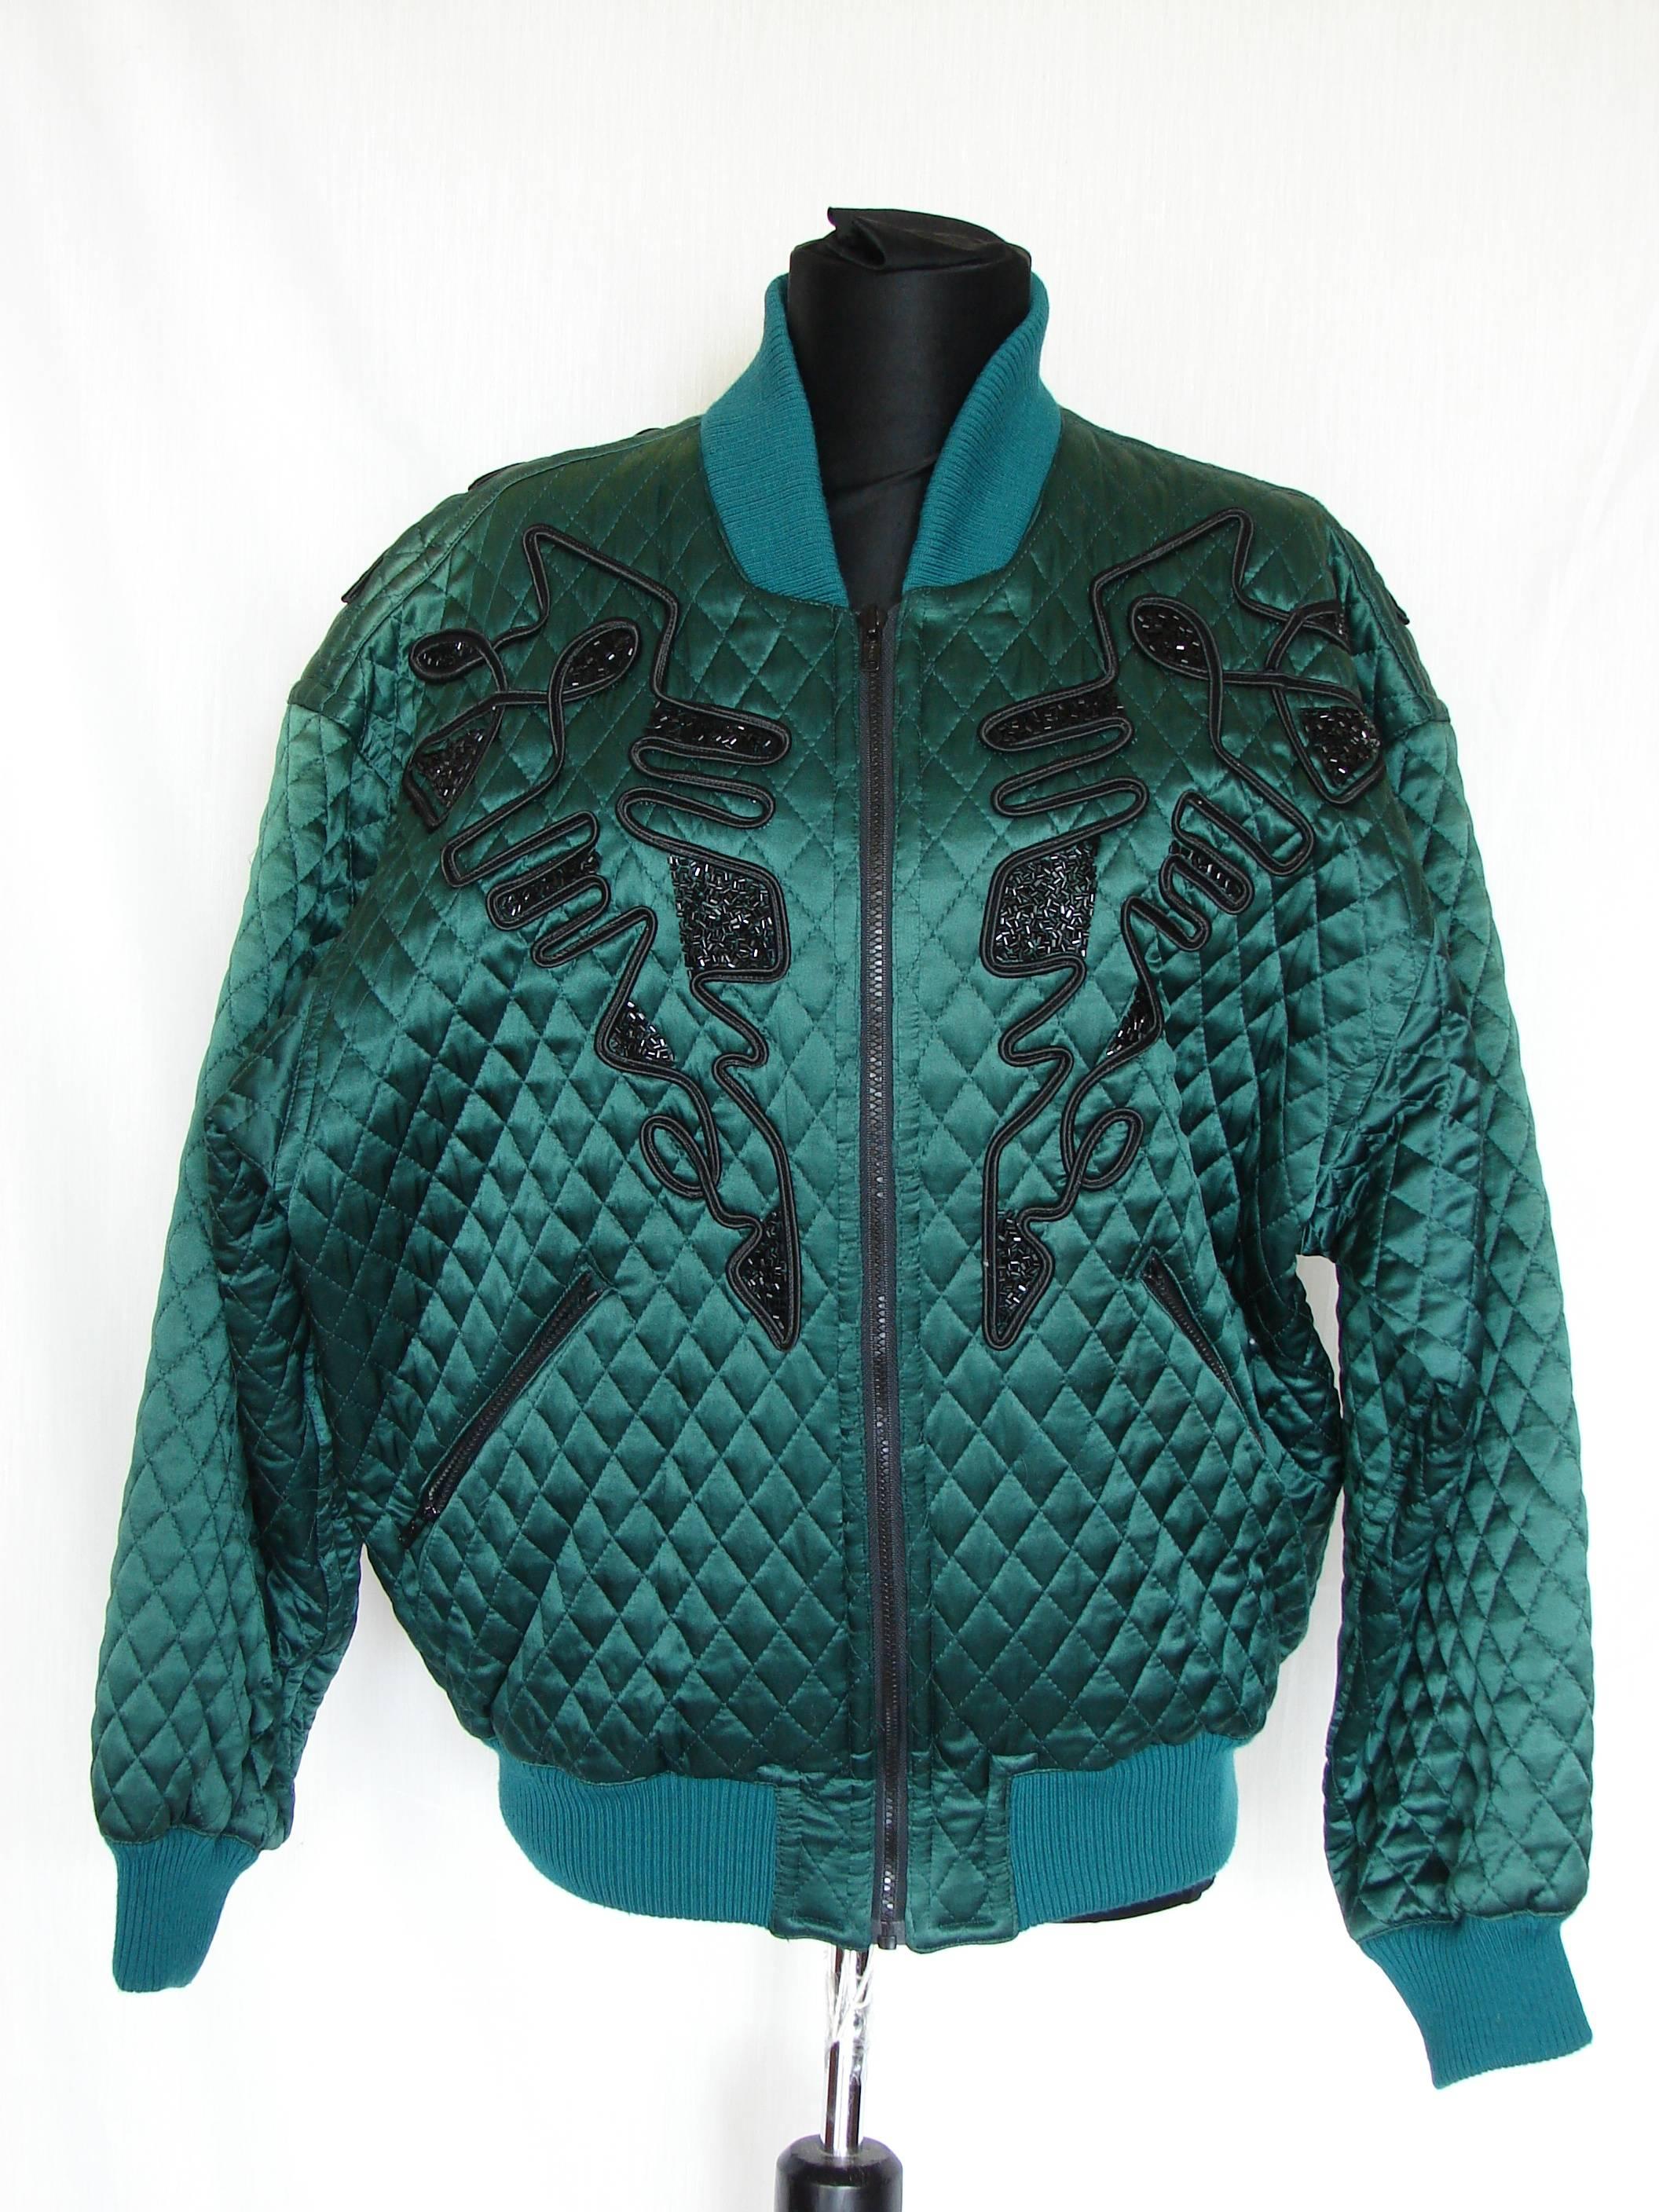 Kansai Yamamoto O2 Green Quilted Silk Jacket with Black Jet Bead Designs 1980s M In Good Condition In Port Saint Lucie, FL